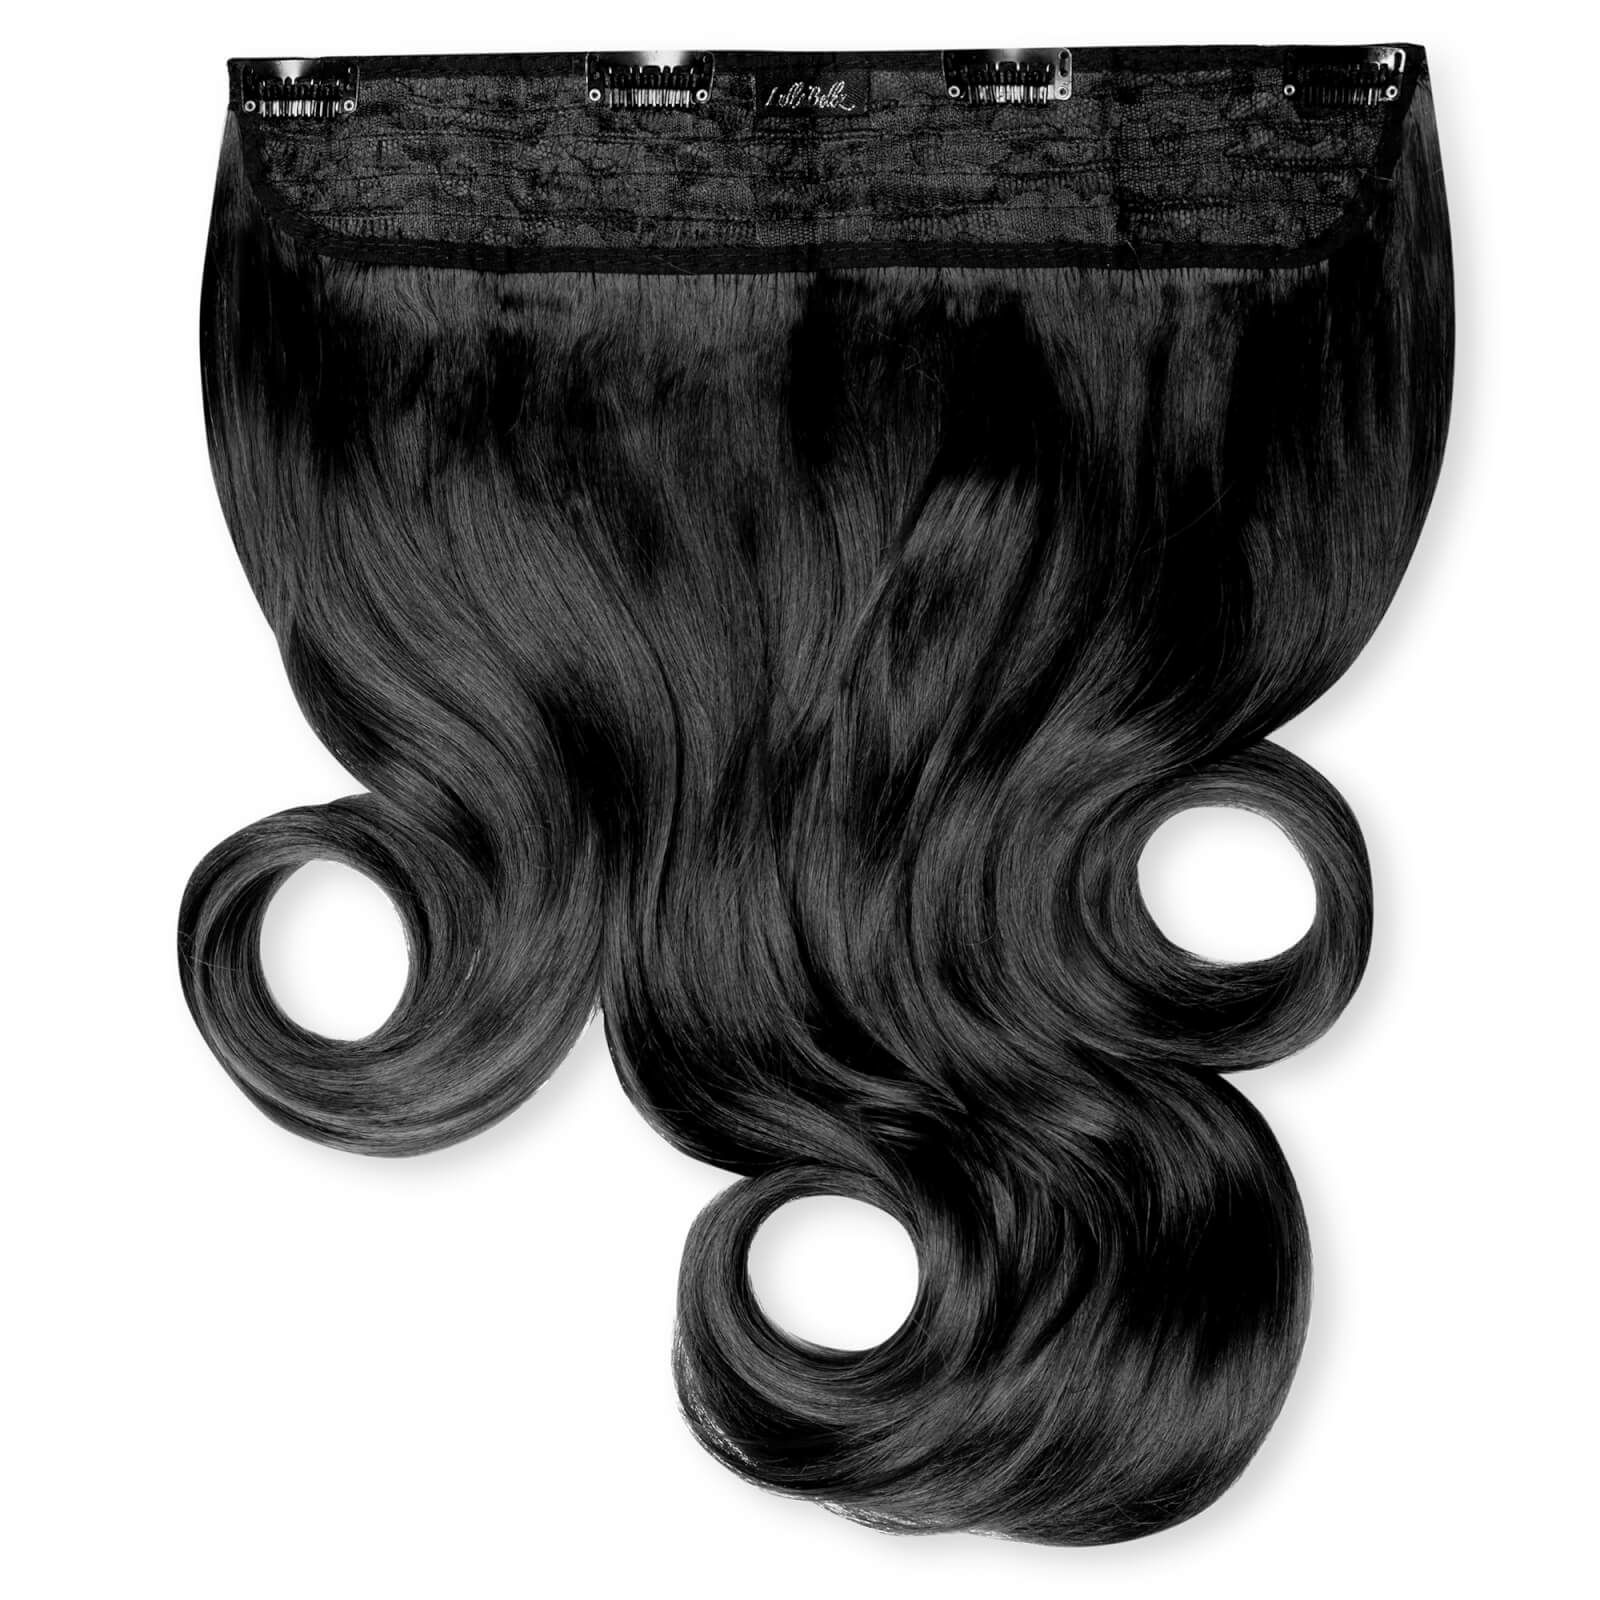 LullaBellz Thick 16 1-Piece Curly Clip in Hair Extensions (Various Colours) - Natural Black